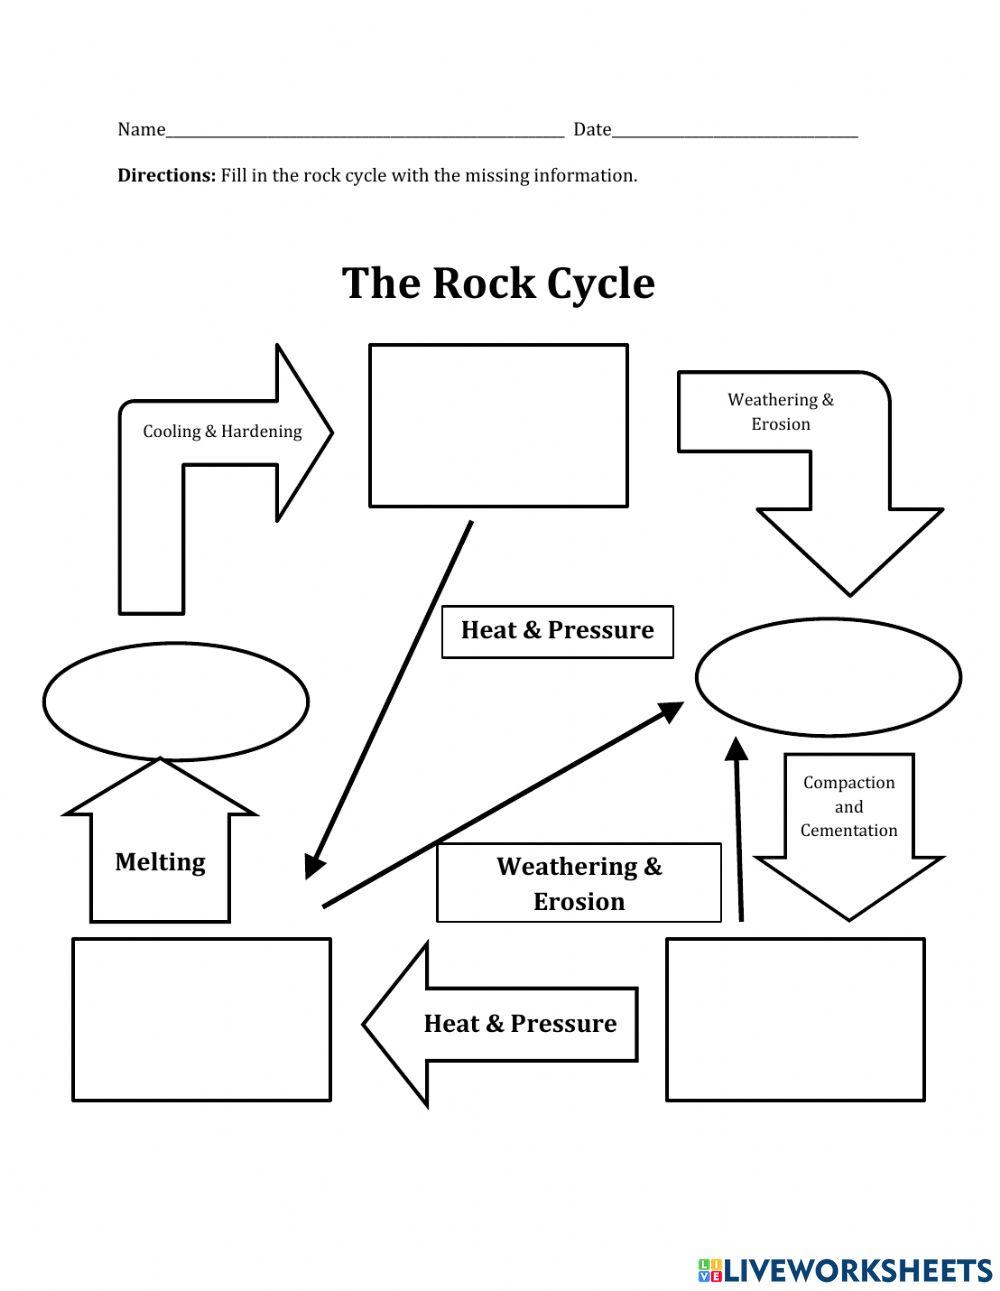 Rock Cycle Diagram (fill in)